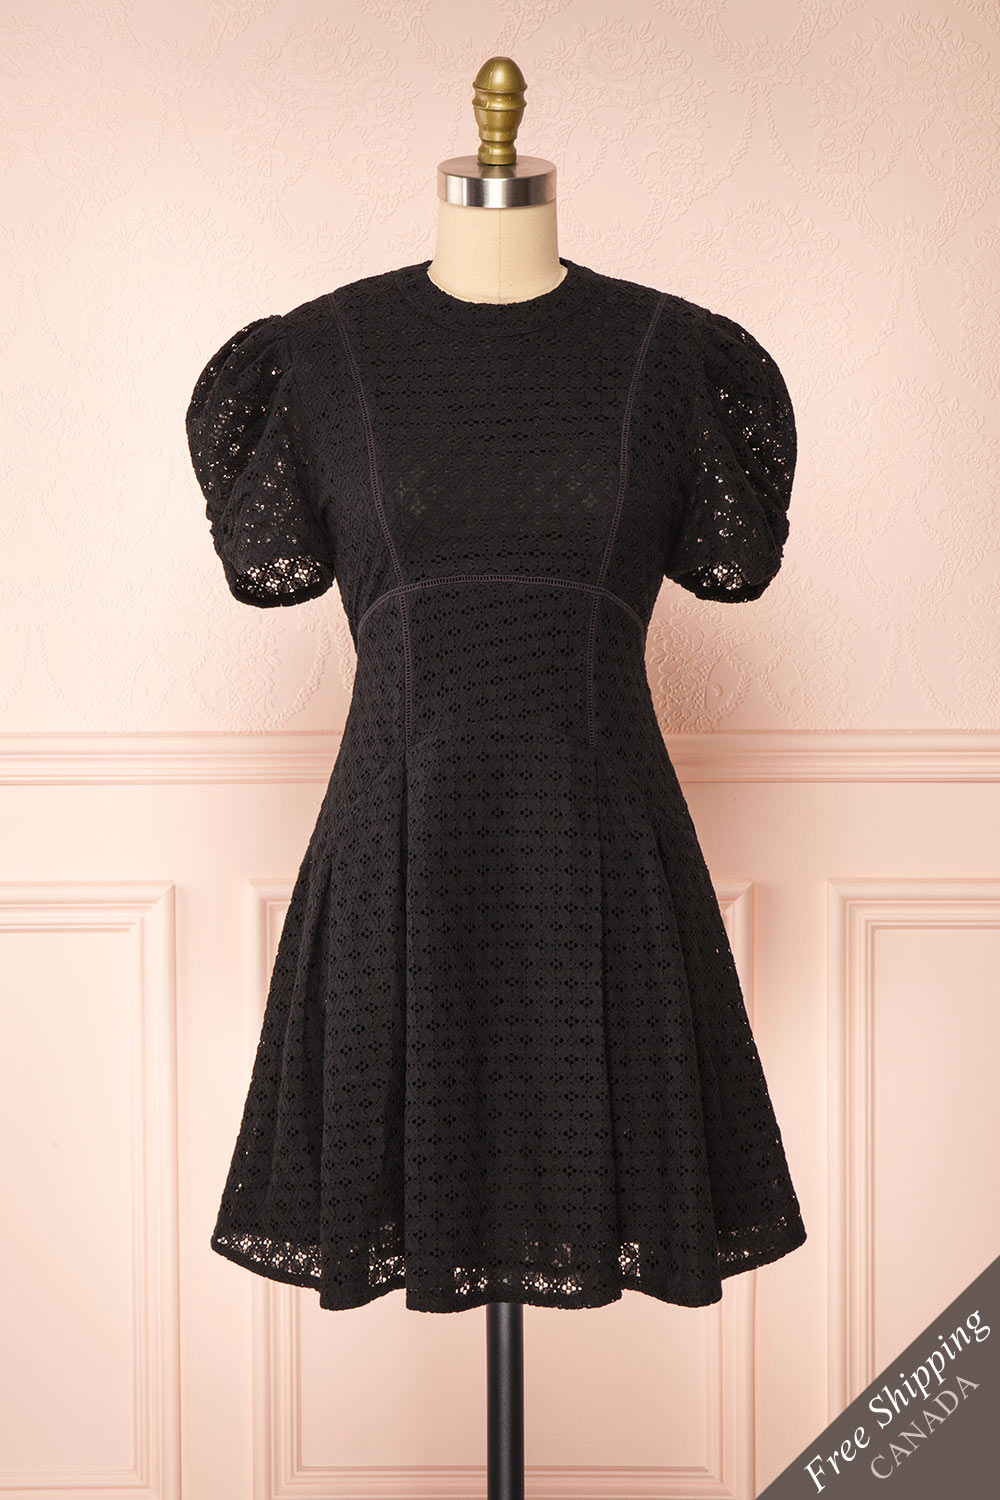 Morena Black Embroidered Short Sleeve Dress | Boutique 1861 front view 